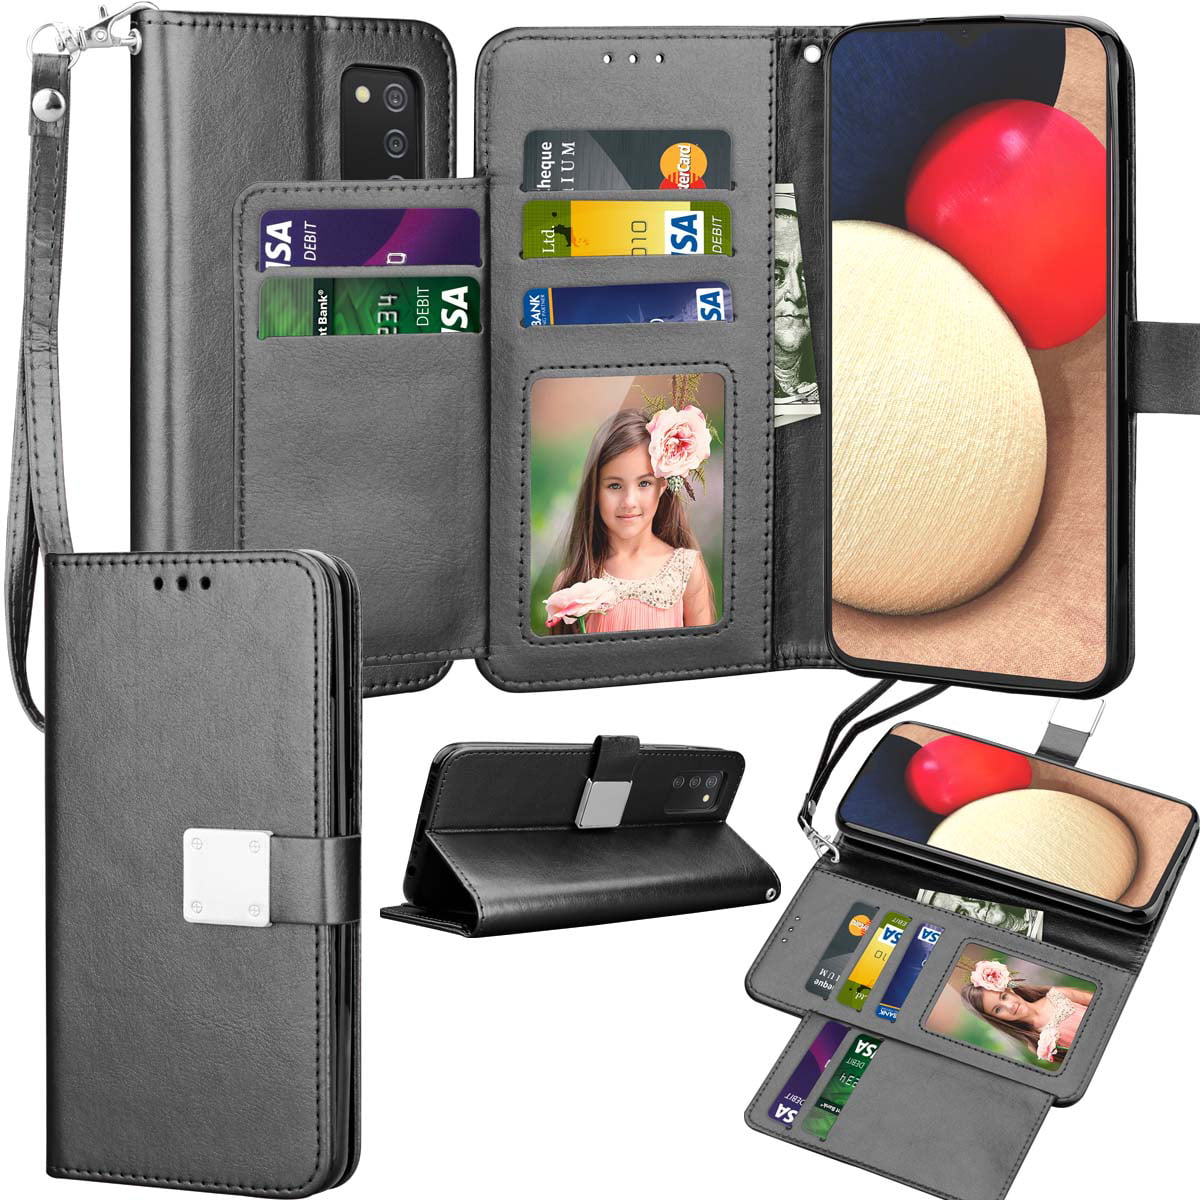 2018 Tosim Wallet Case for Galaxy A9 PU Leather Case with Card Holder Slots Flip Folio Phone Cover with Kickstand for Samsung Galaxy A9 2018 TOEBE030115 Grey